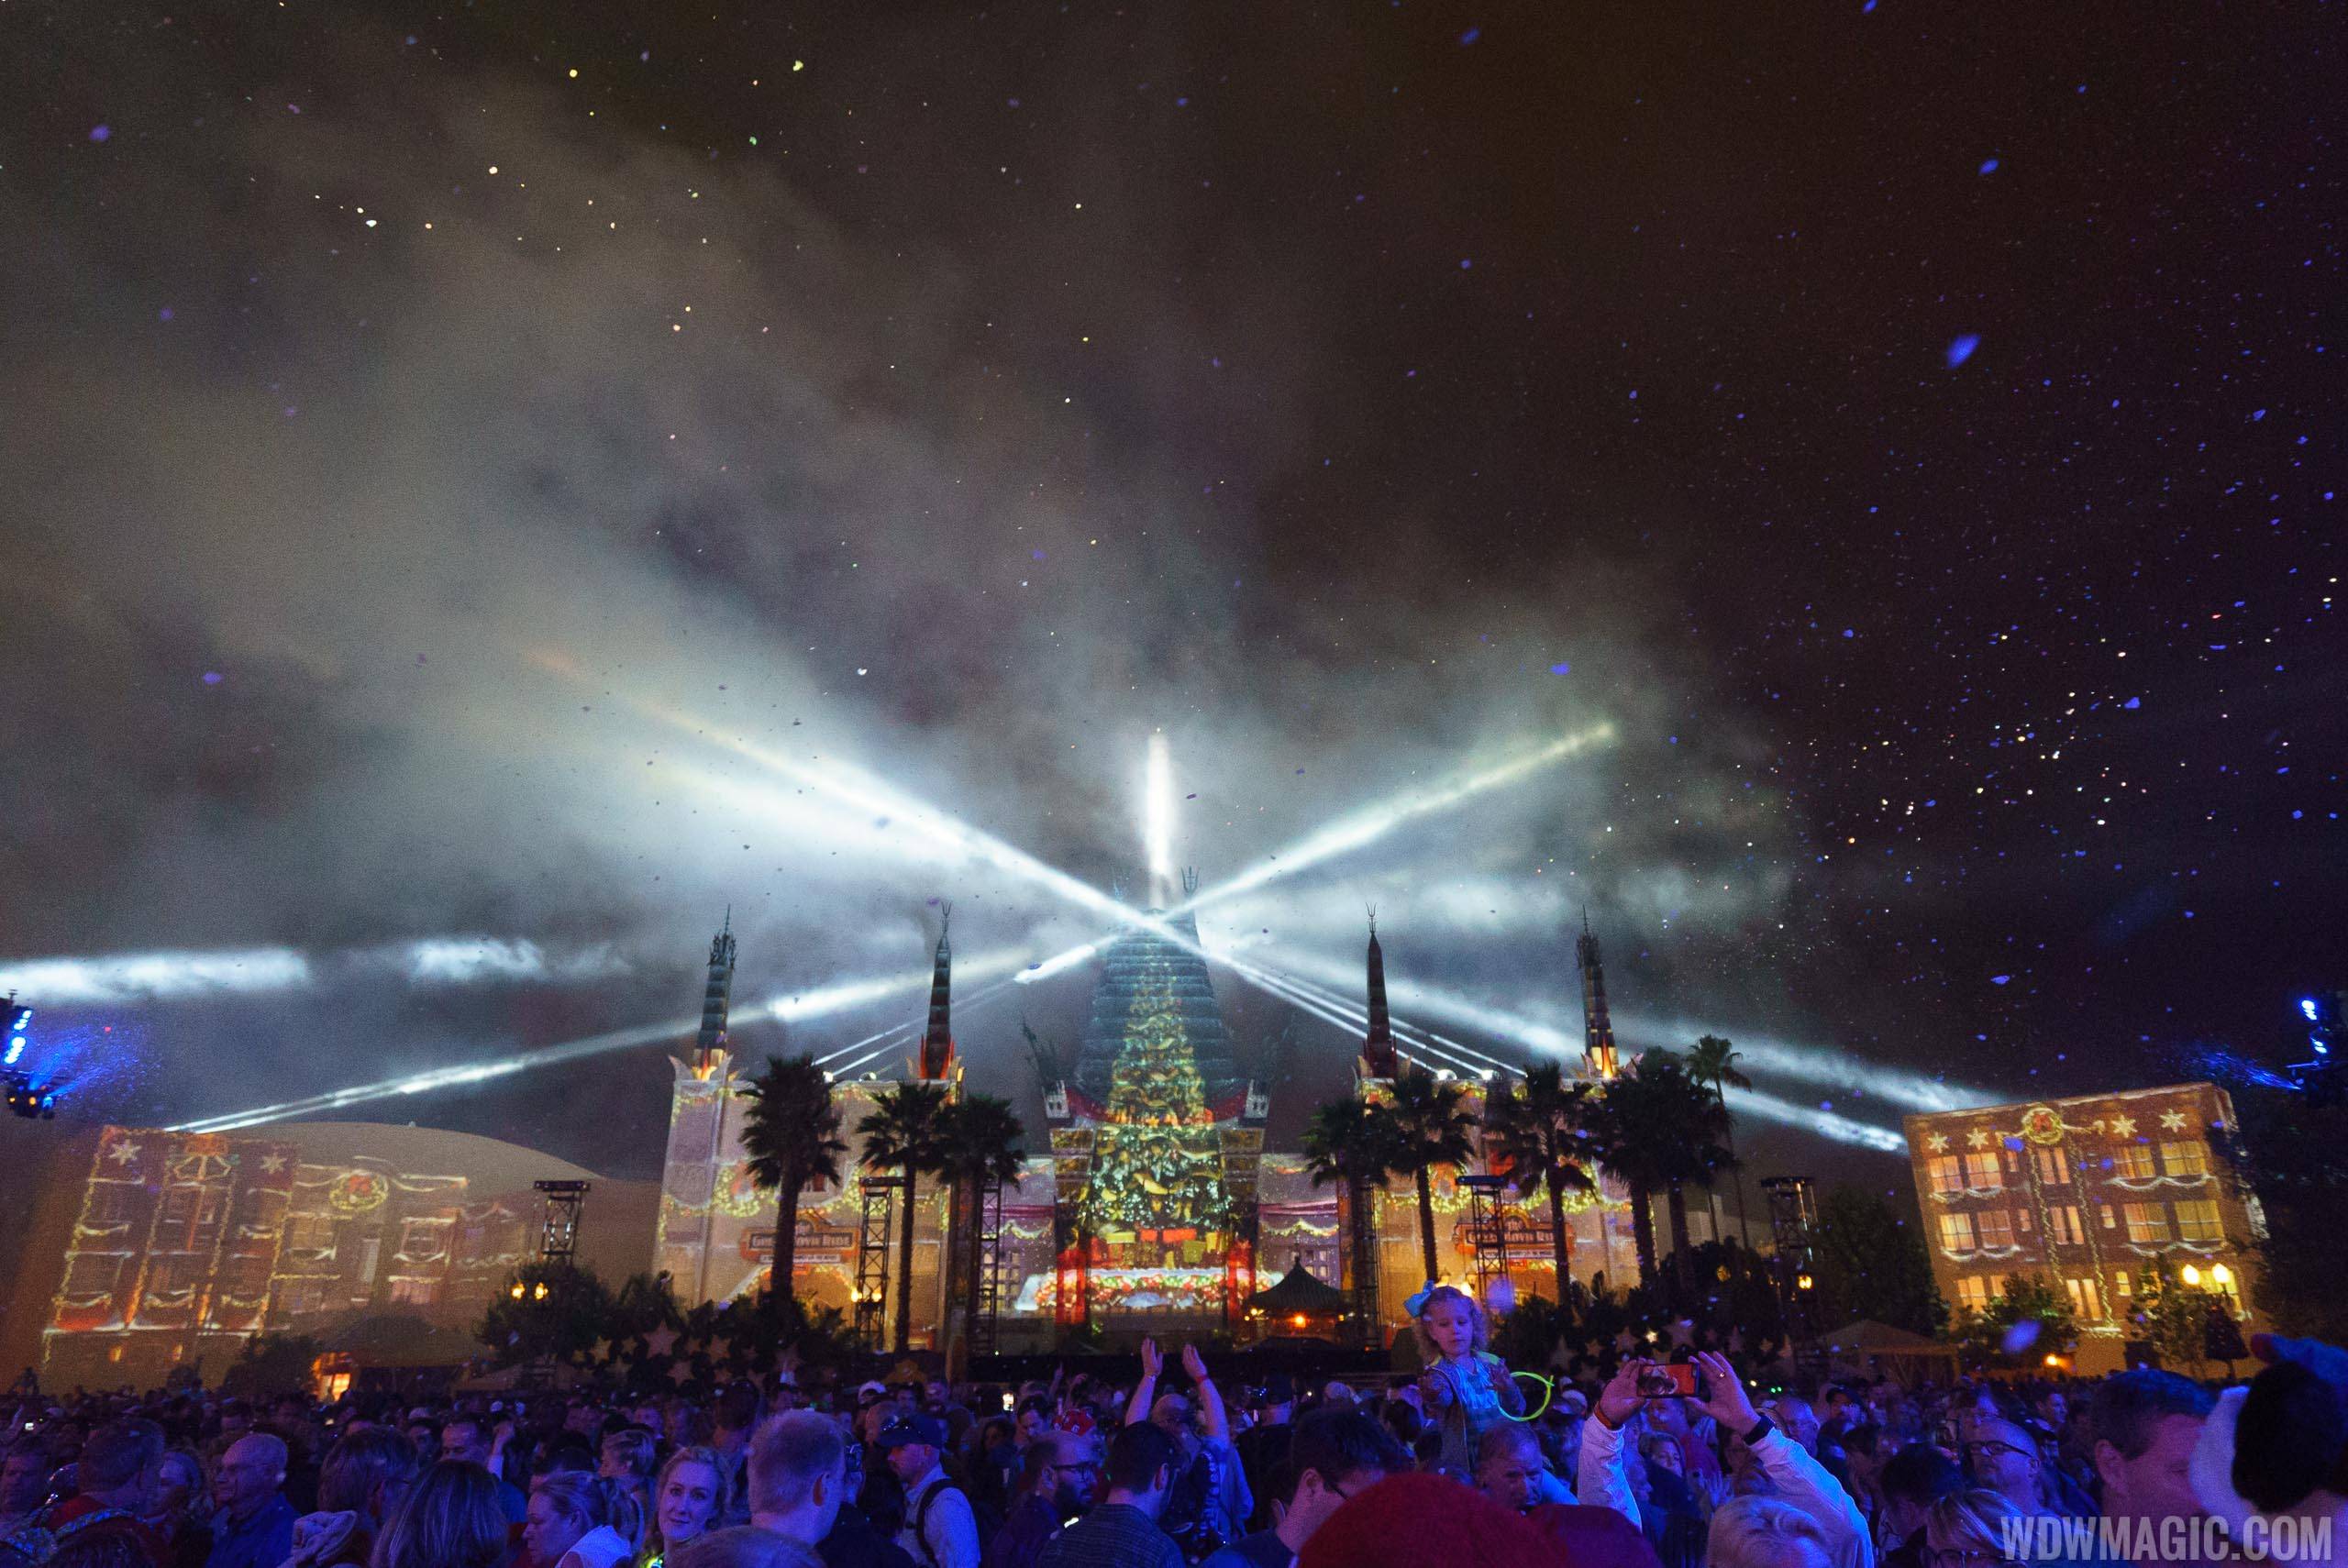 Jingle Bell, Jingle BAM! Holiday Dessert Party now open for reservations